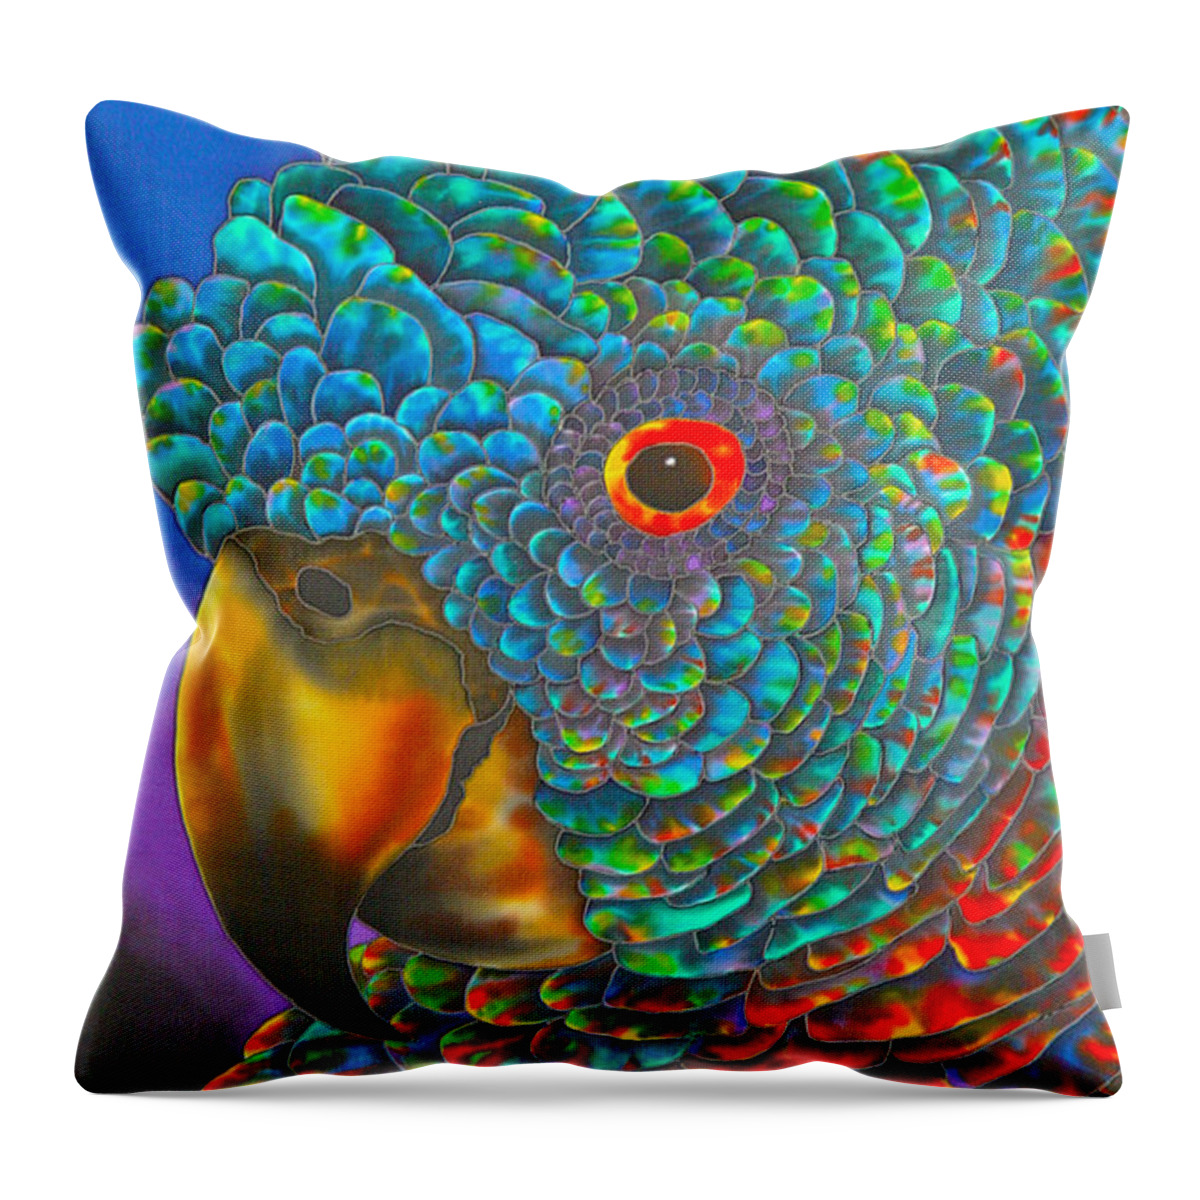  Throw Pillow featuring the painting St. Lucian Parrot - Exotic Bird by Daniel Jean-Baptiste